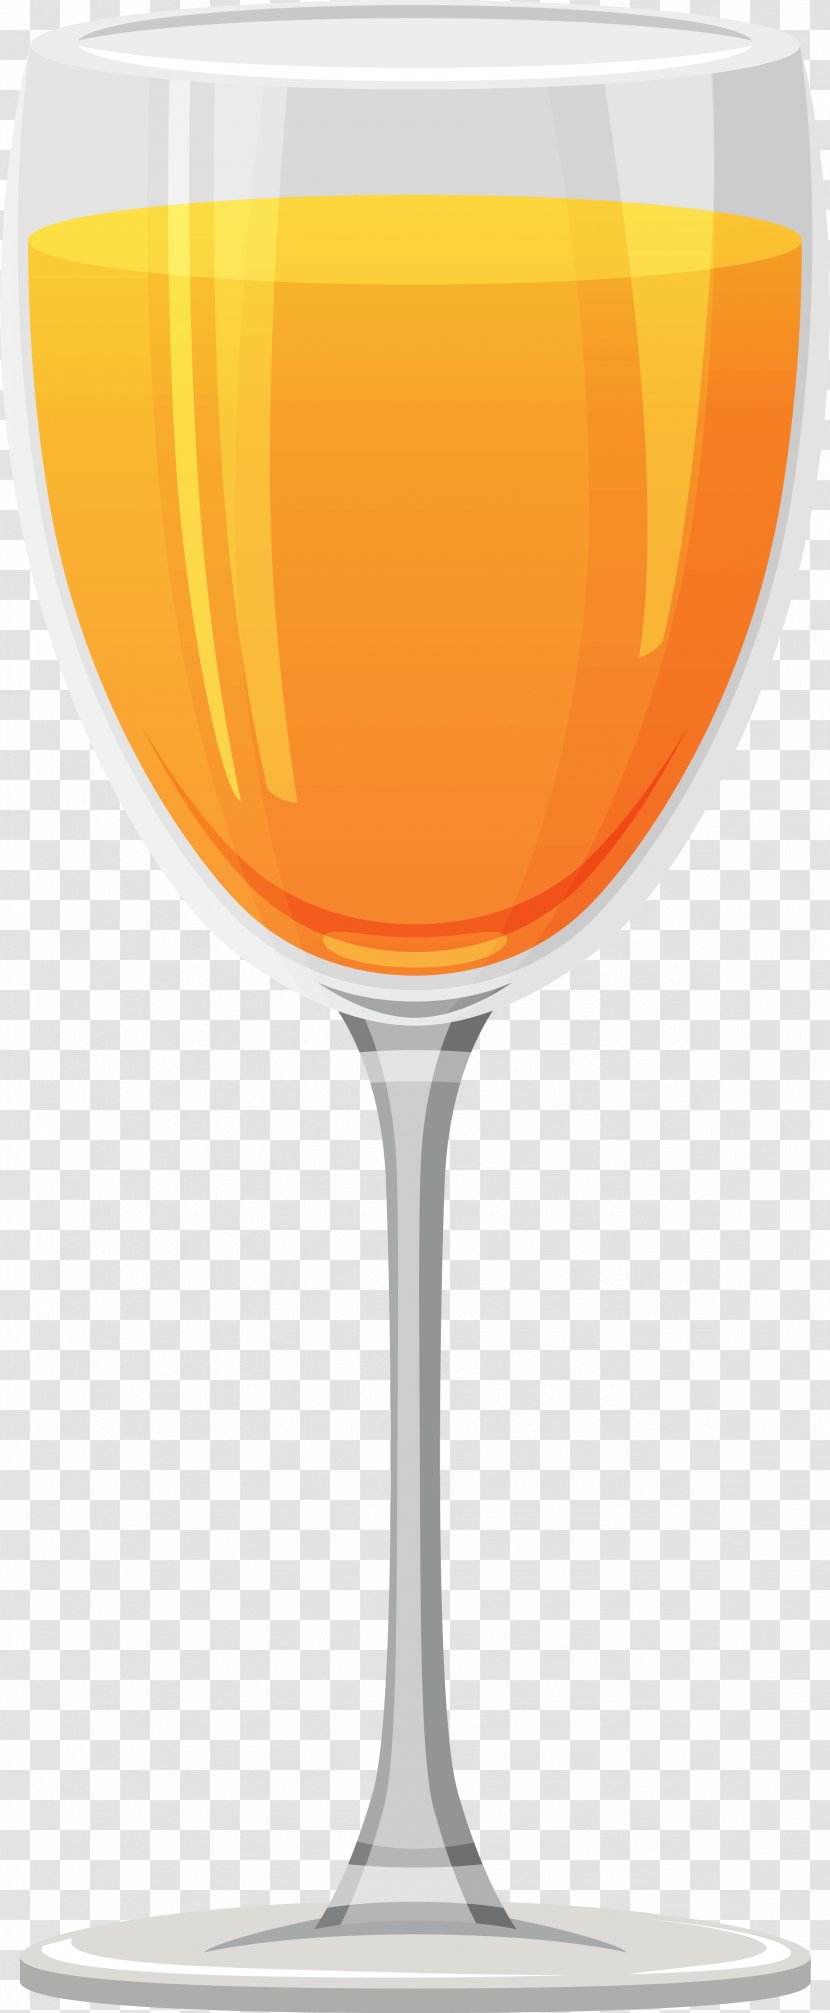 Magnifying Glass - Cocktail - Image Transparent PNG